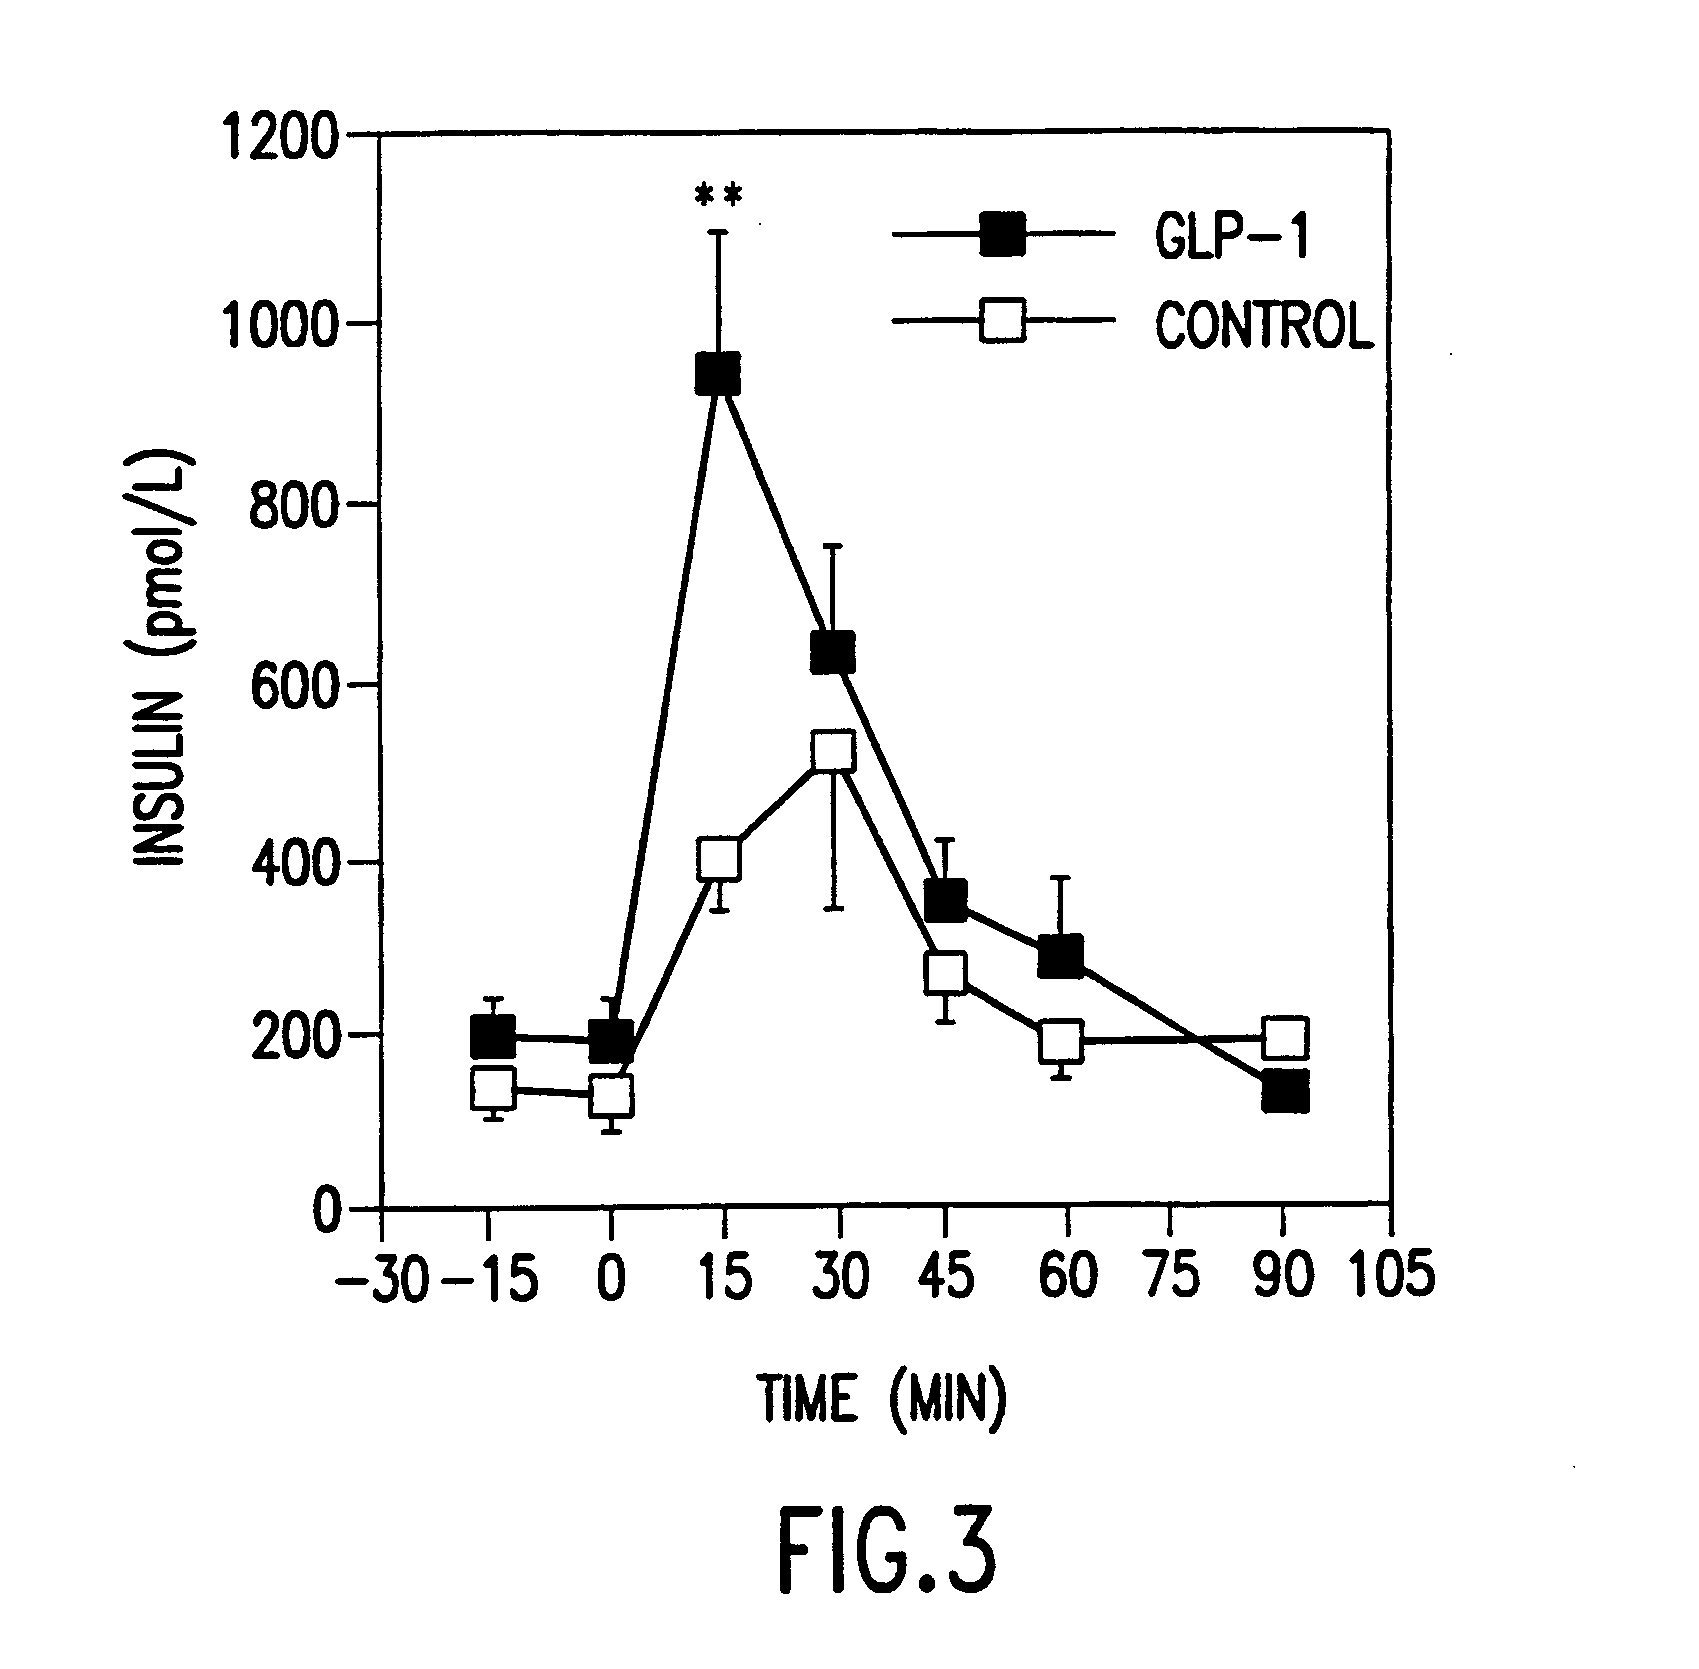 Differentiation of non-insulin producing cells into insulin producing cells by GLP-1 or exendin-4 and uses thereof